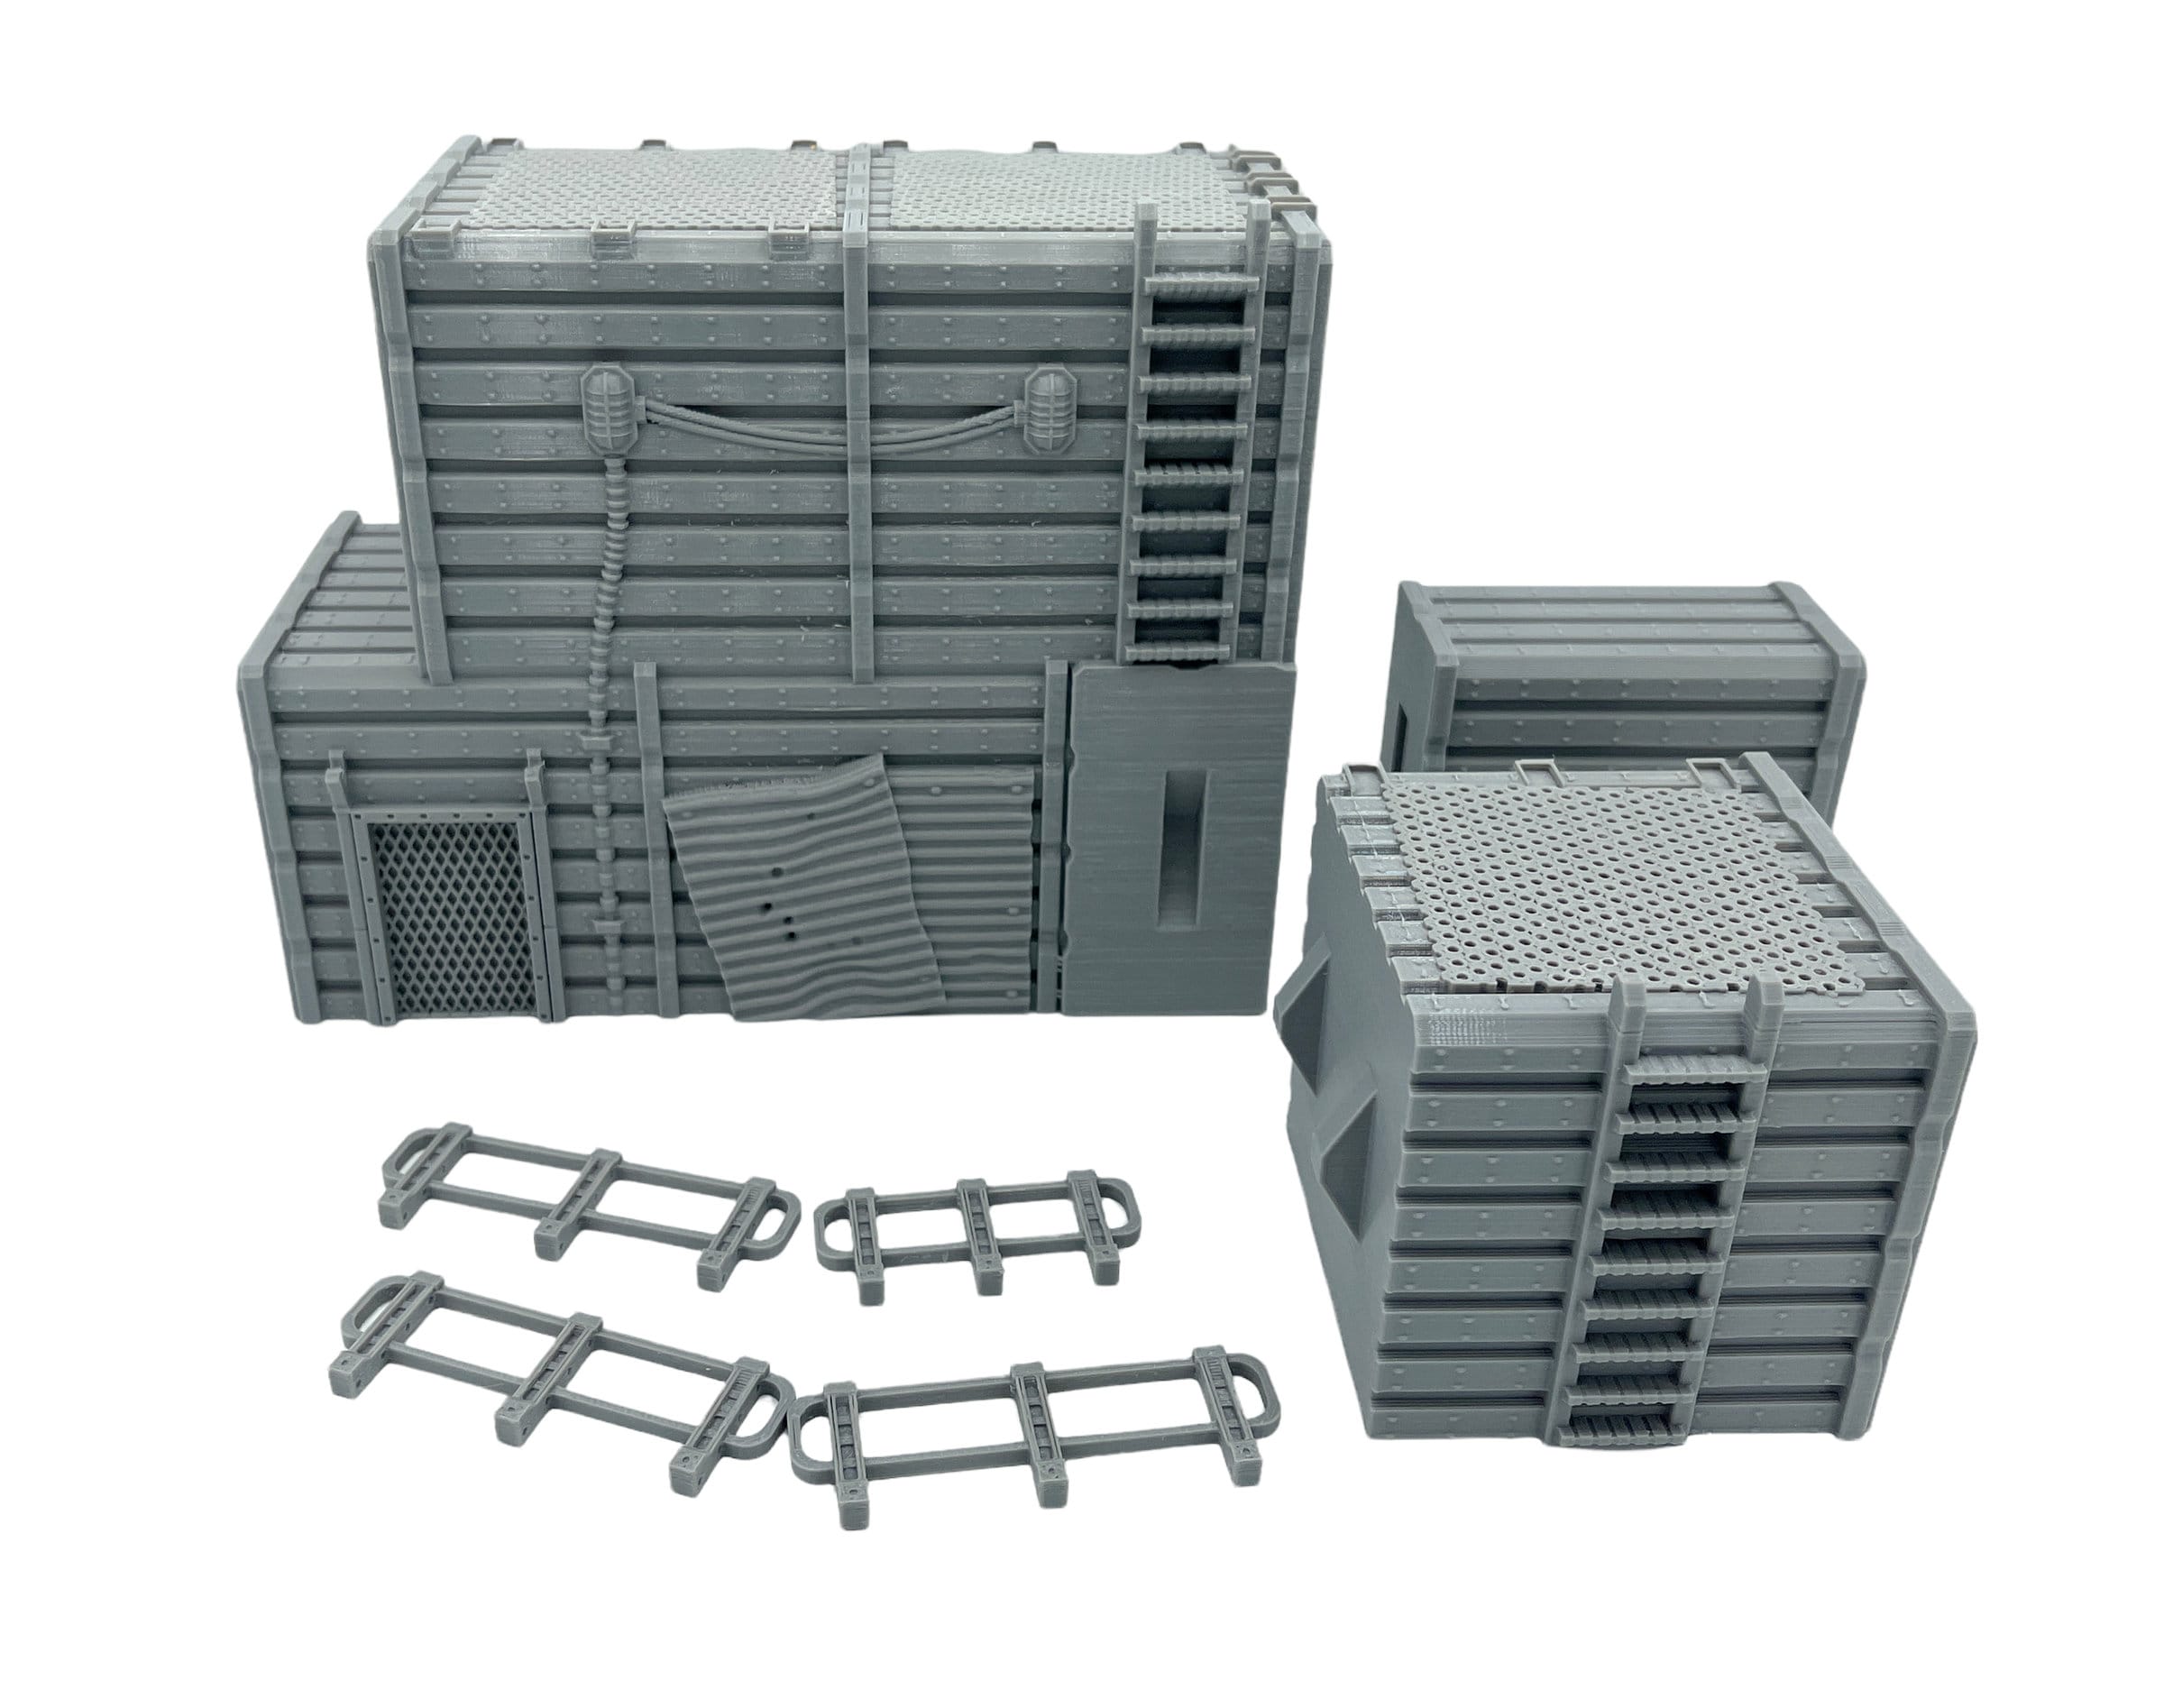 City Docks Container Stack 1 / Sacrusmundus / RPG and Wargame 3d Printed Tabletop Terrain / Legion / 40k / Shatterpoint